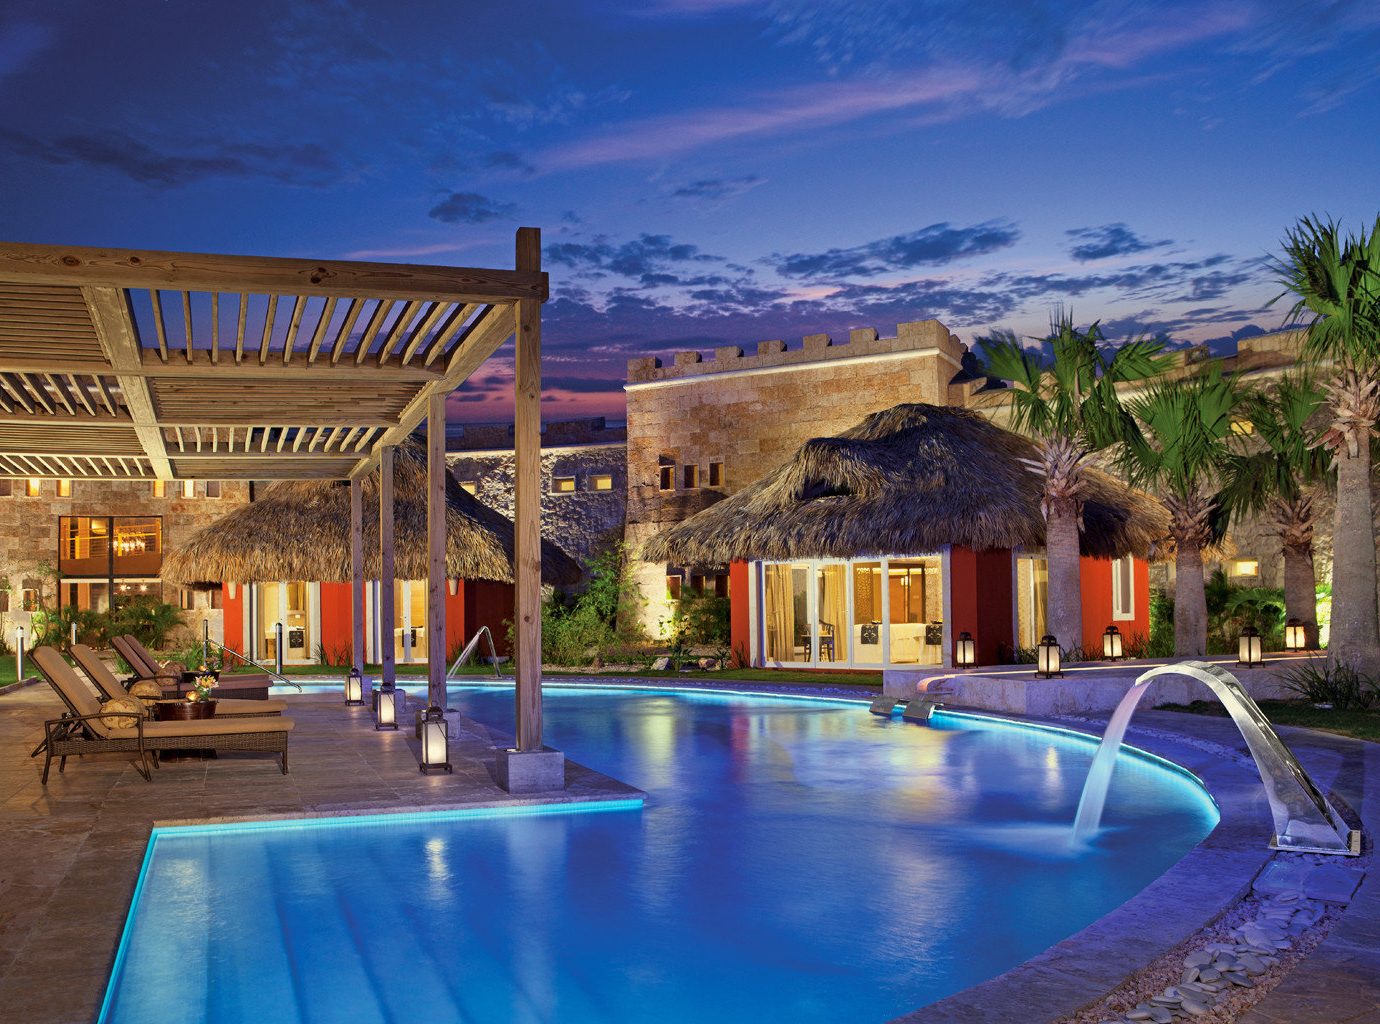 The Best AdultsOnly AllInclusive Resorts in the Caribbean